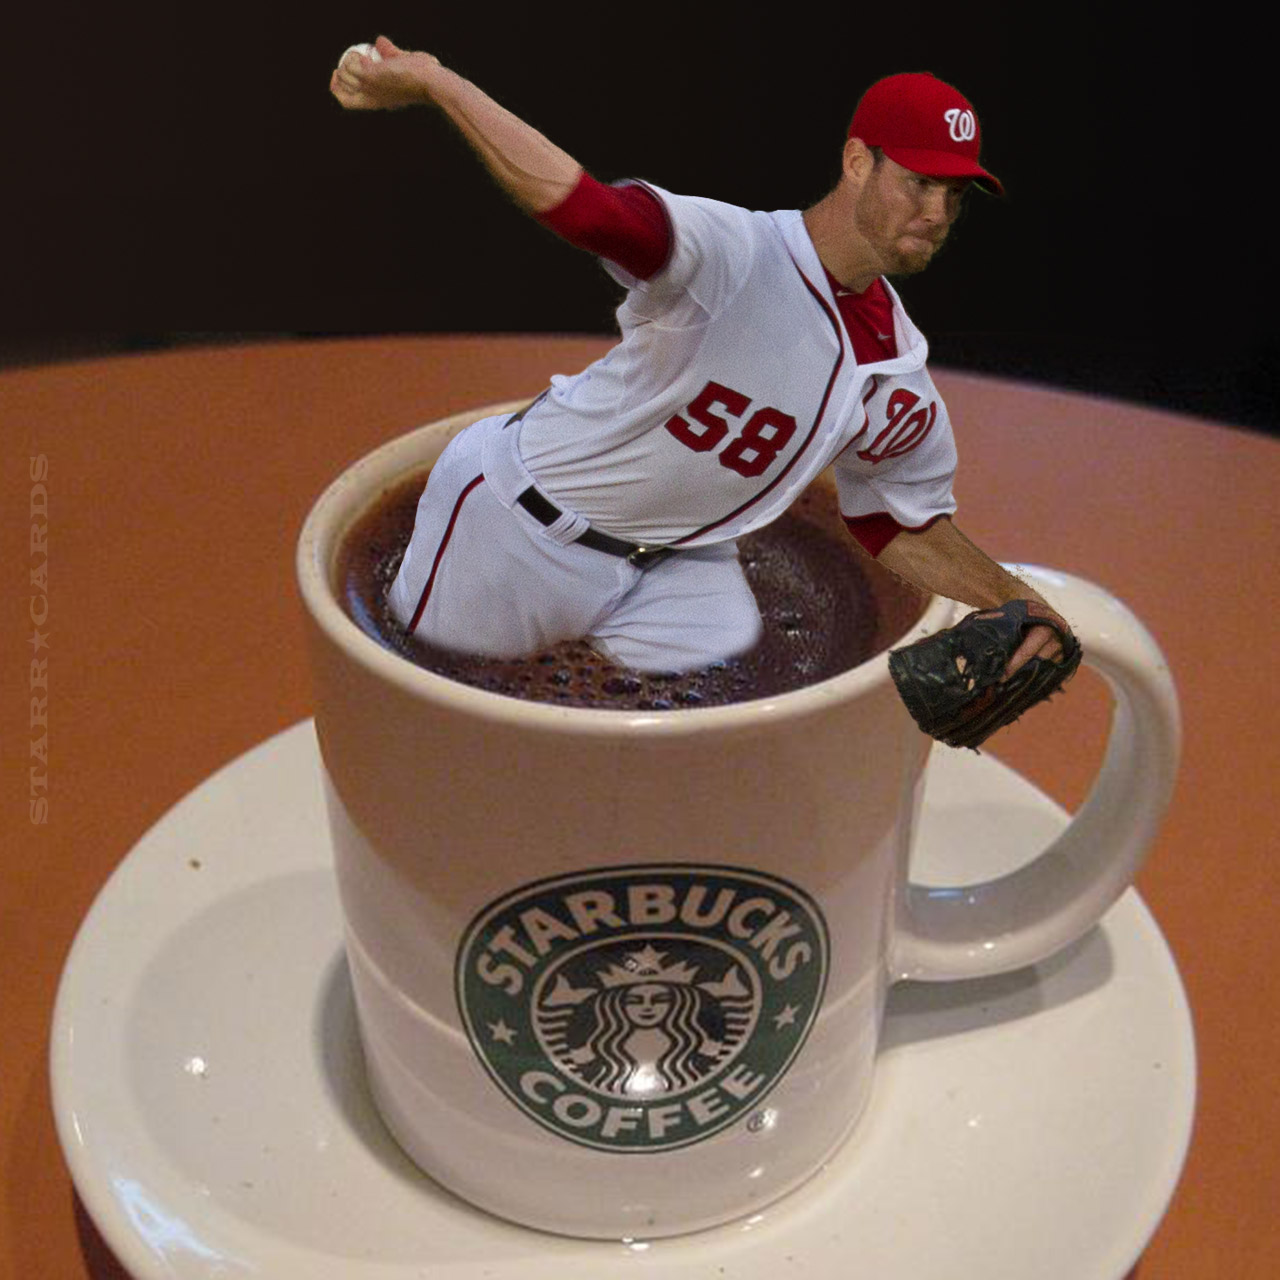 Nationals pitcher Doug Fister gives the gift of Starbucks coffee